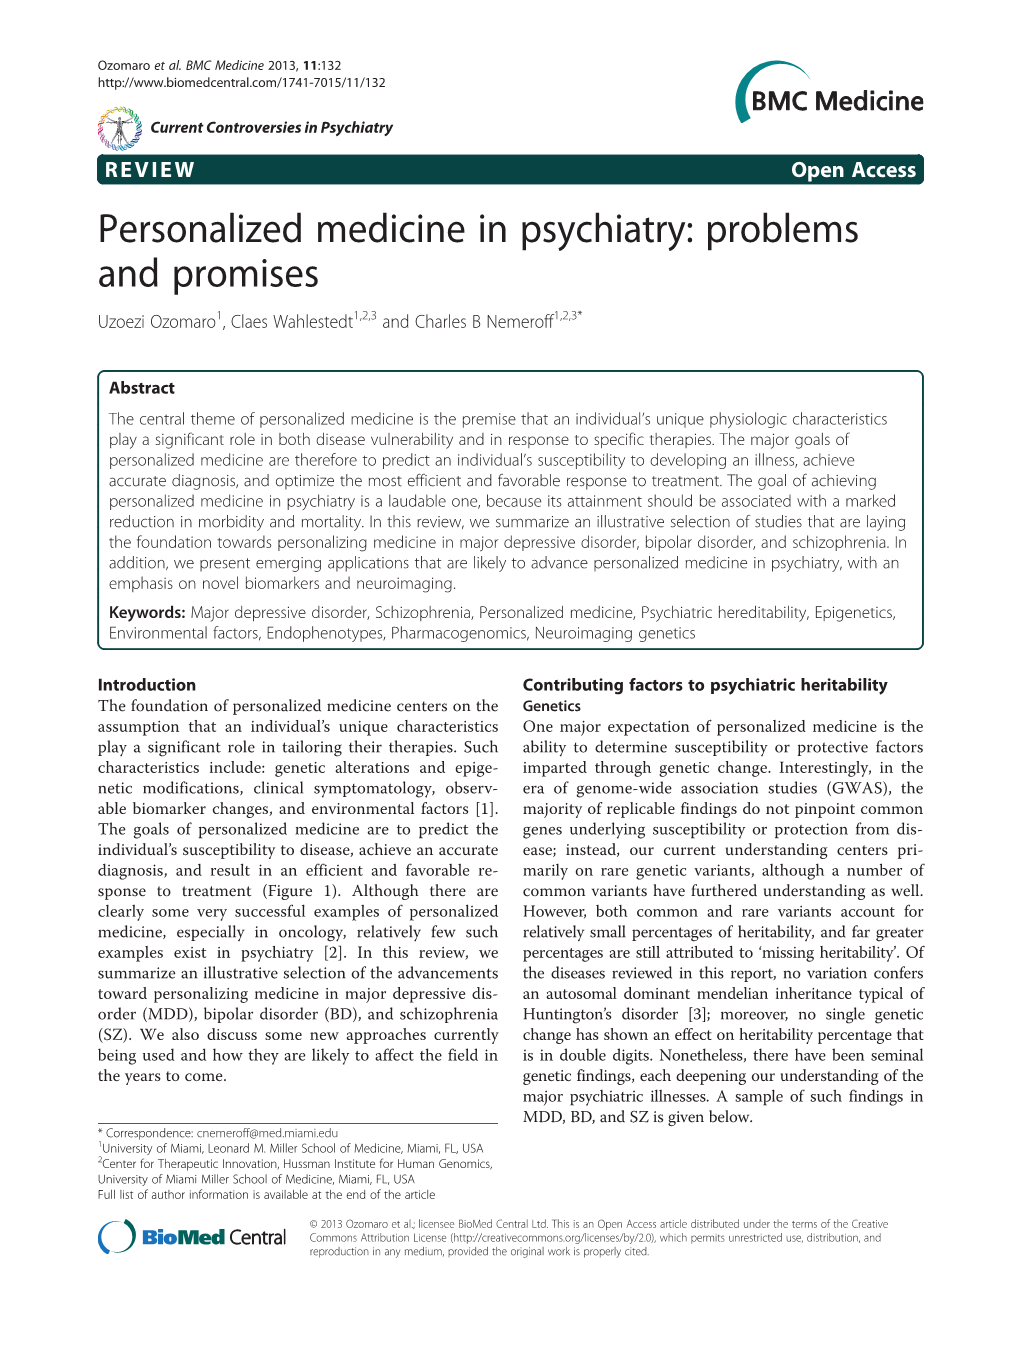 Personalized Medicine in Psychiatry: Problems and Promises Uzoezi Ozomaro1, Claes Wahlestedt1,2,3 and Charles B Nemeroff1,2,3*